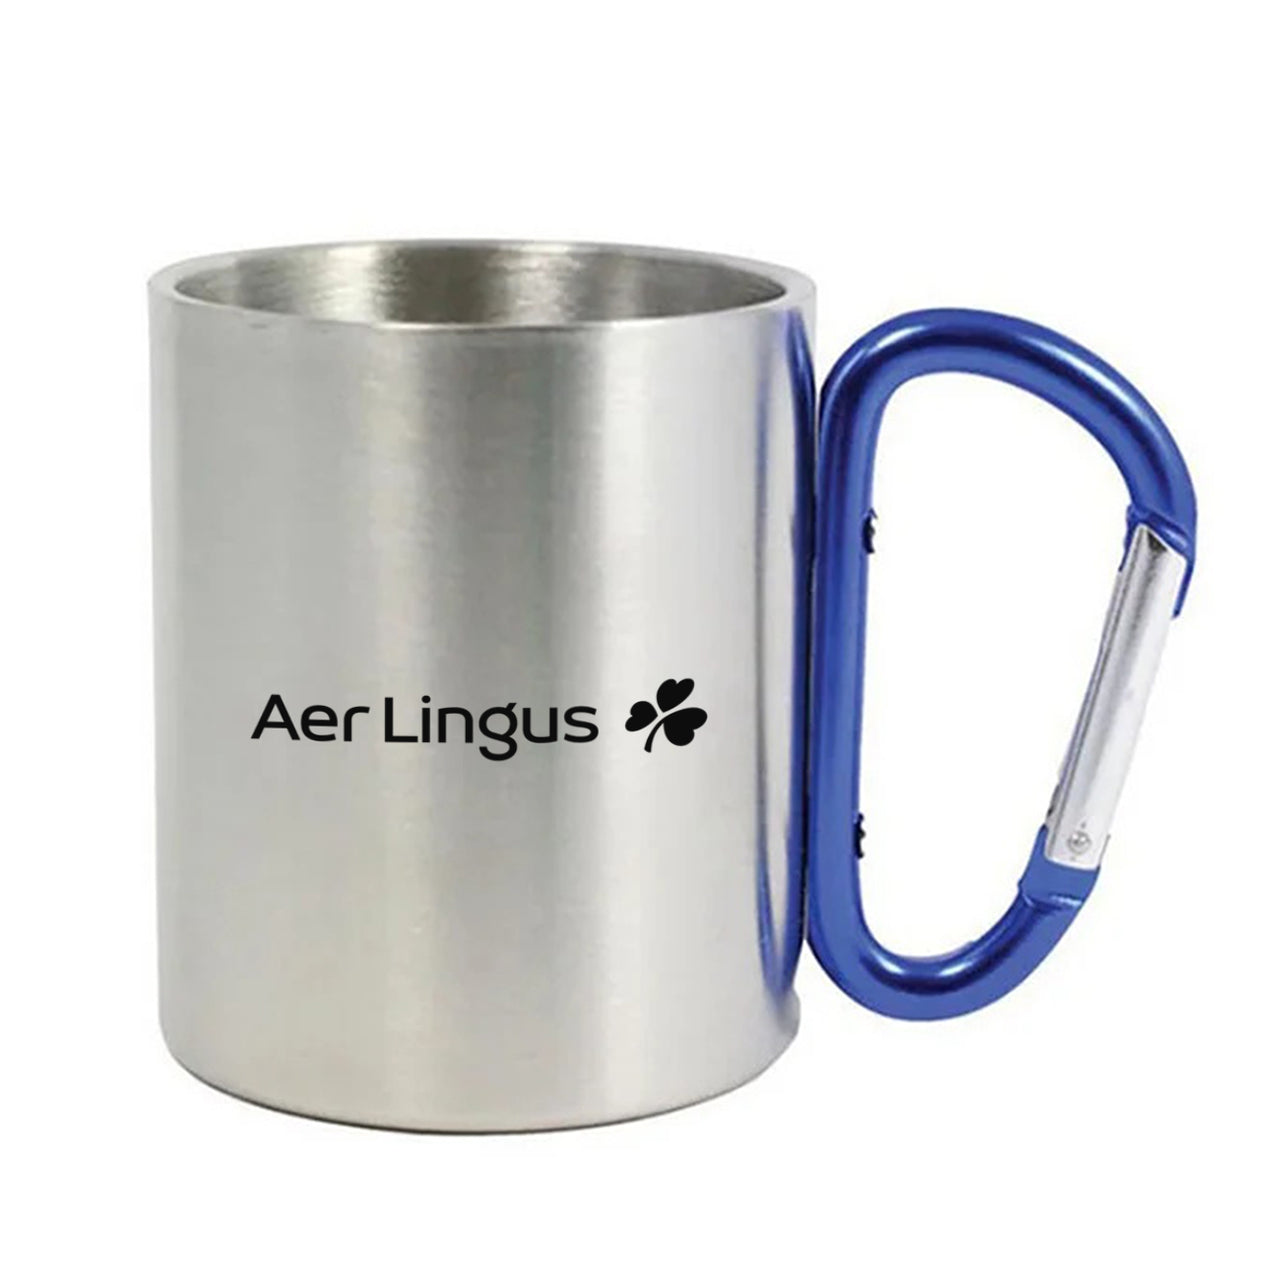 Aer Lingus Airlines Designed Stainless Steel Outdoors Mugs